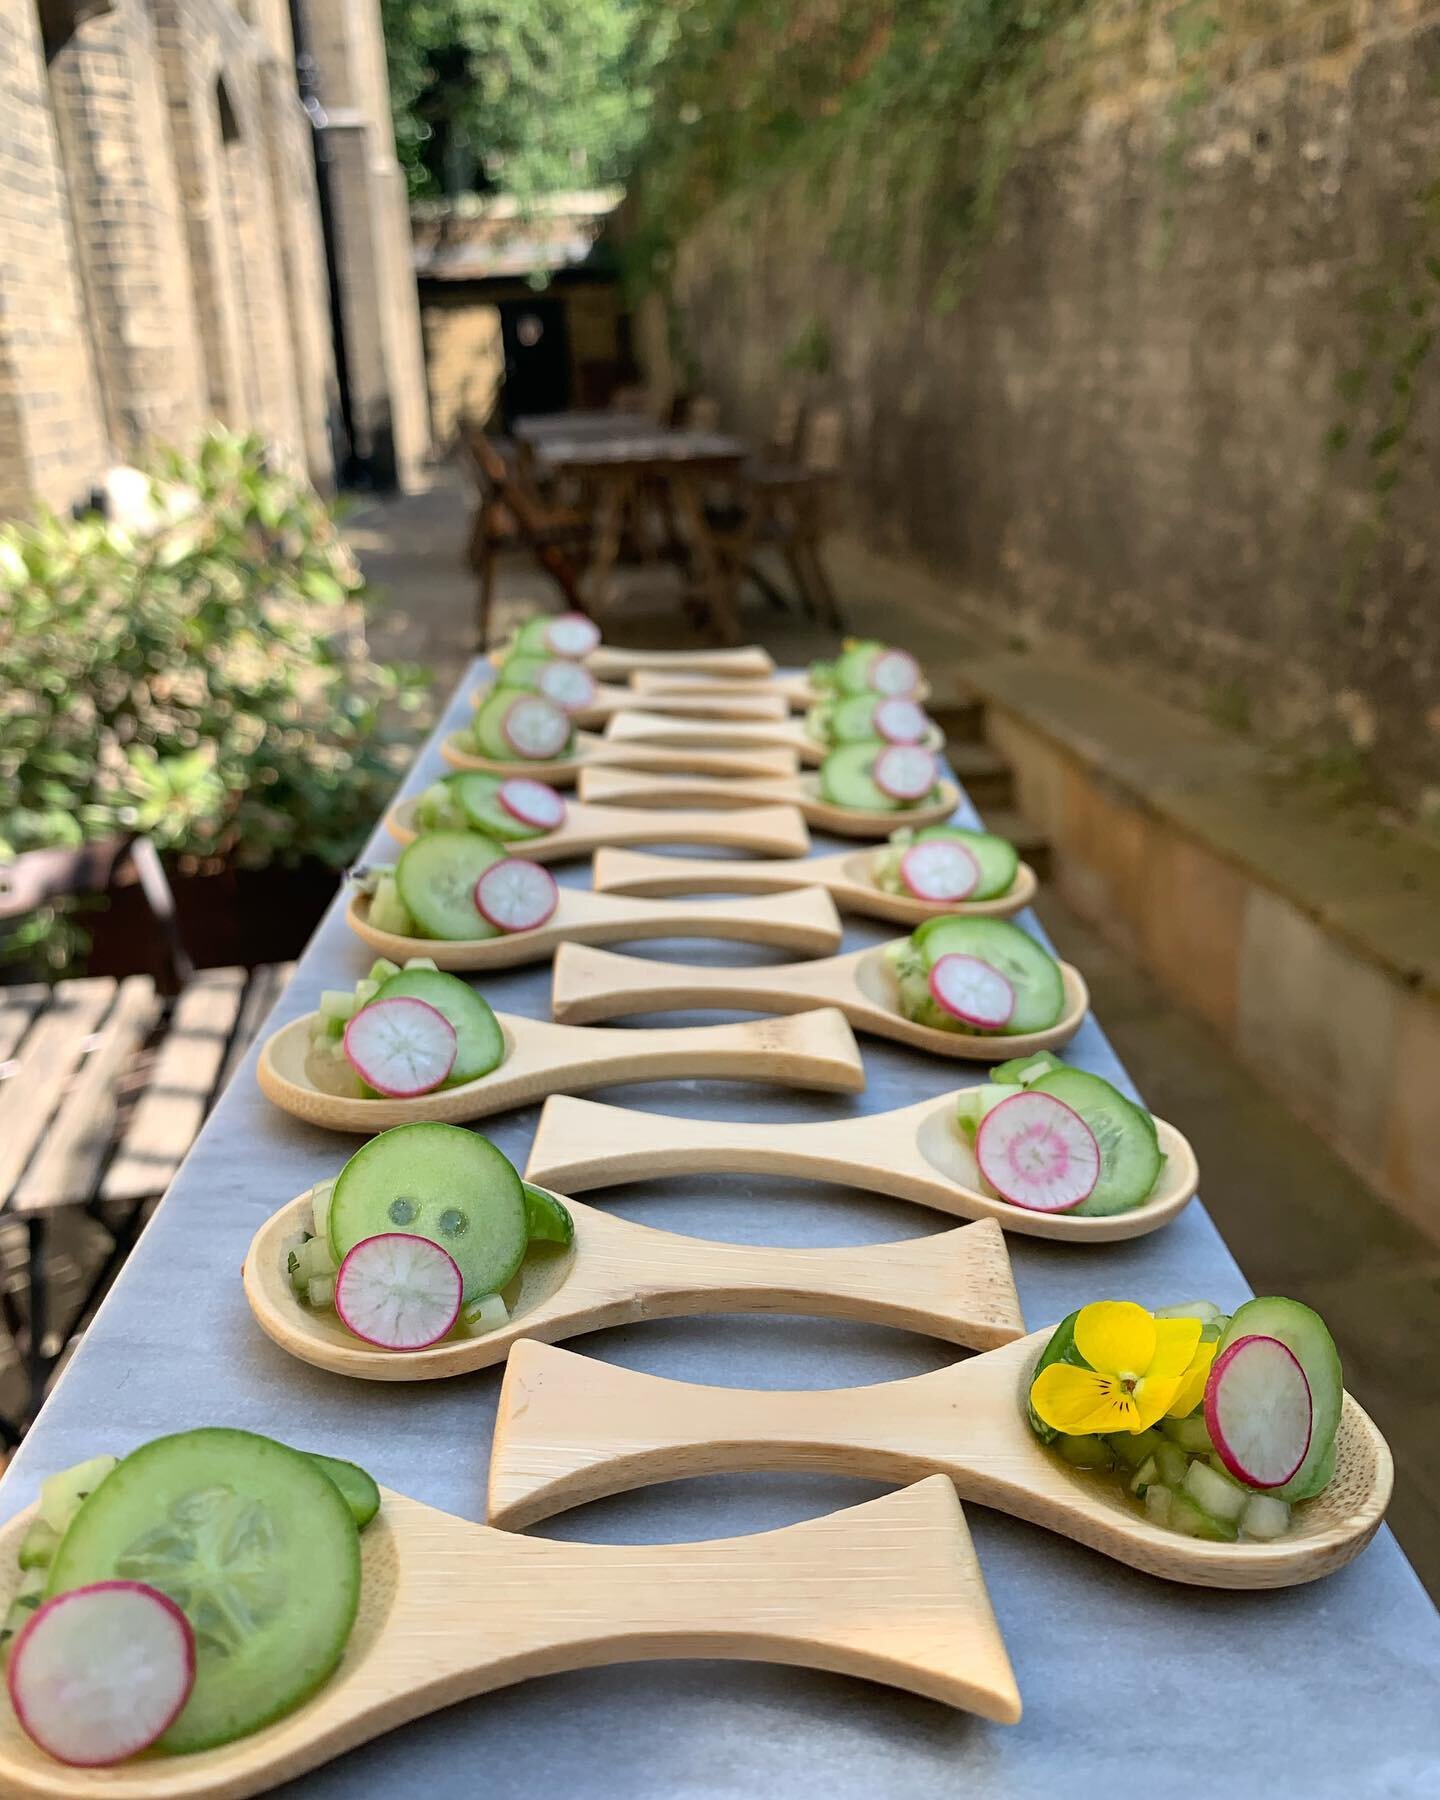 Some of the wedding canap&eacute;s from Saturday afternoon! 

Cucumber and apple tartare with yuzu and mint 

Asparagus and pea filo tarts 

For private canap&eacute; enquiries please email canapeheaven@lolabrandelli.com